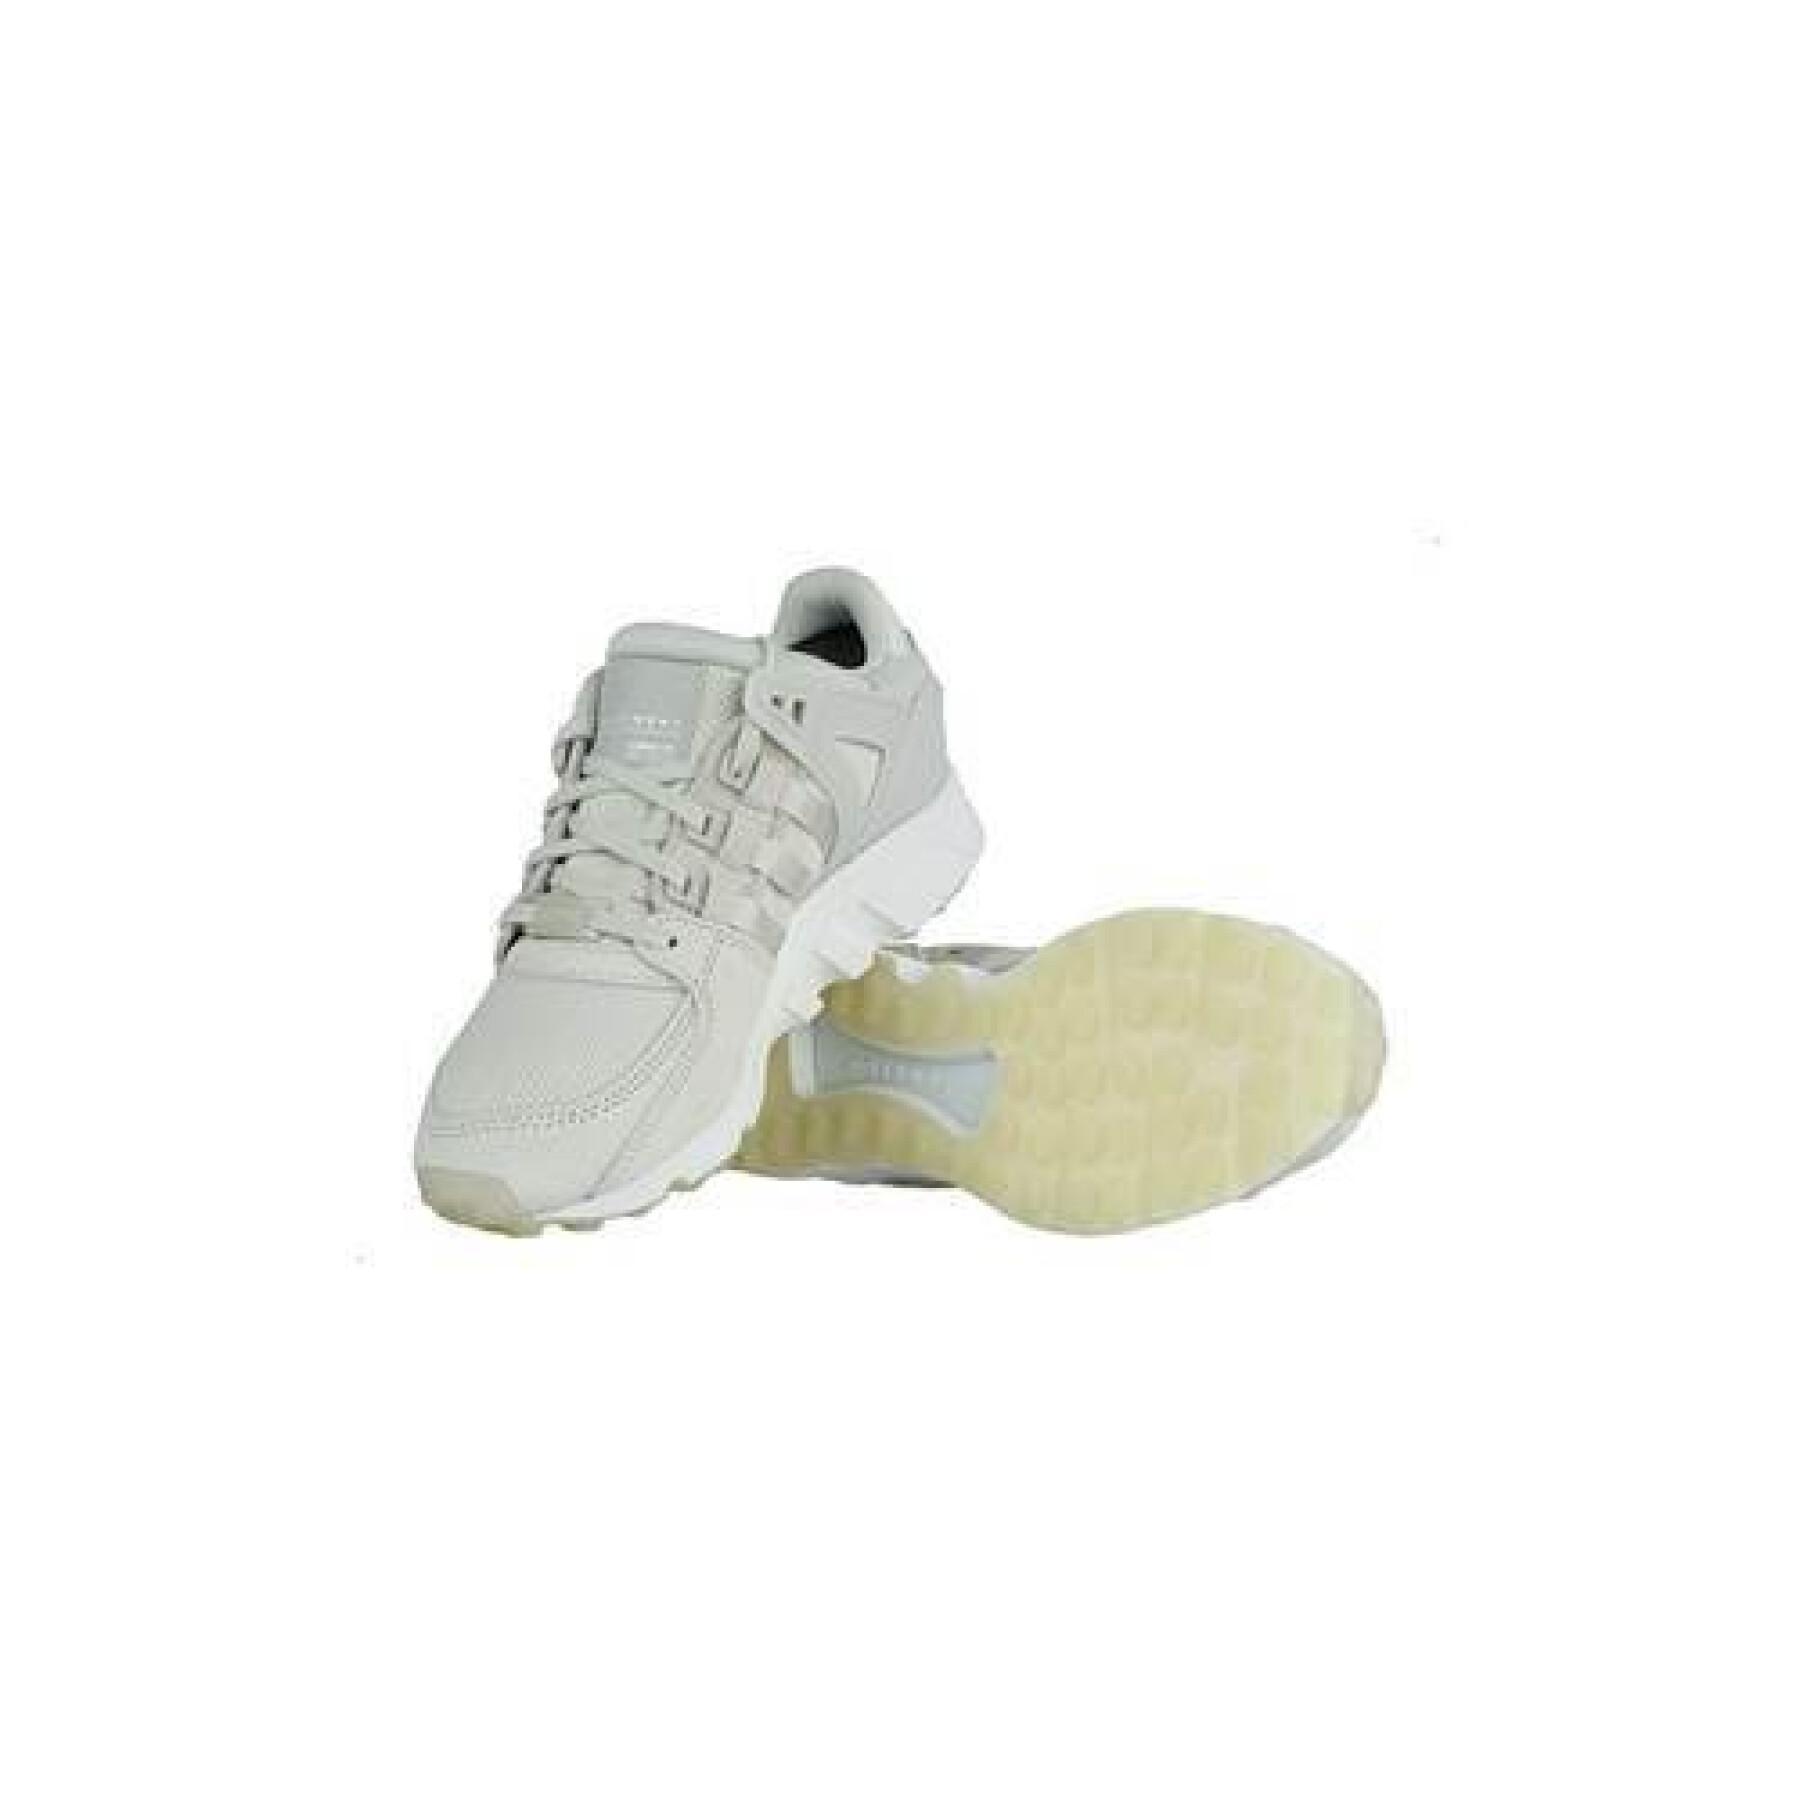 Women's sneakers adidas Eqt Support Rf